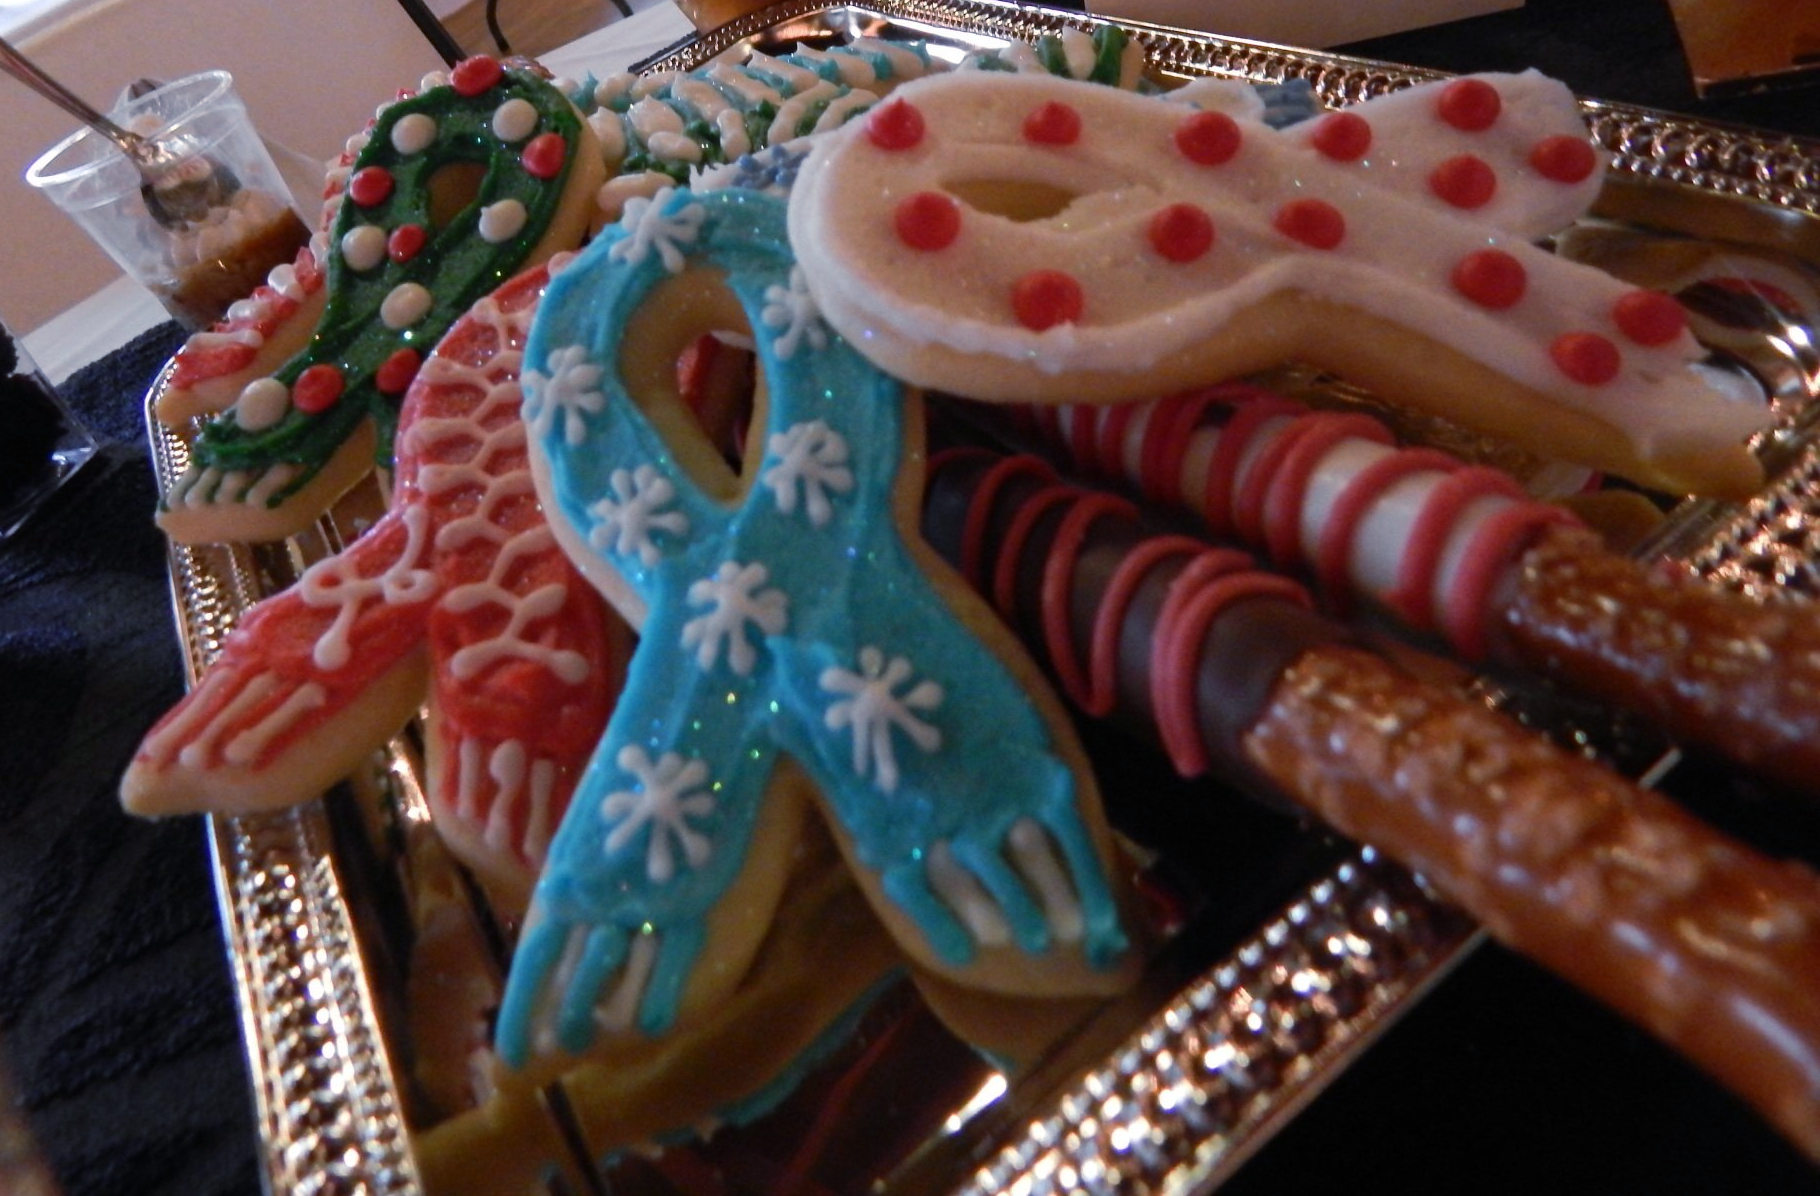 A party tray with dipped pretzel rods and iced sugar cookies shaped like ribbons